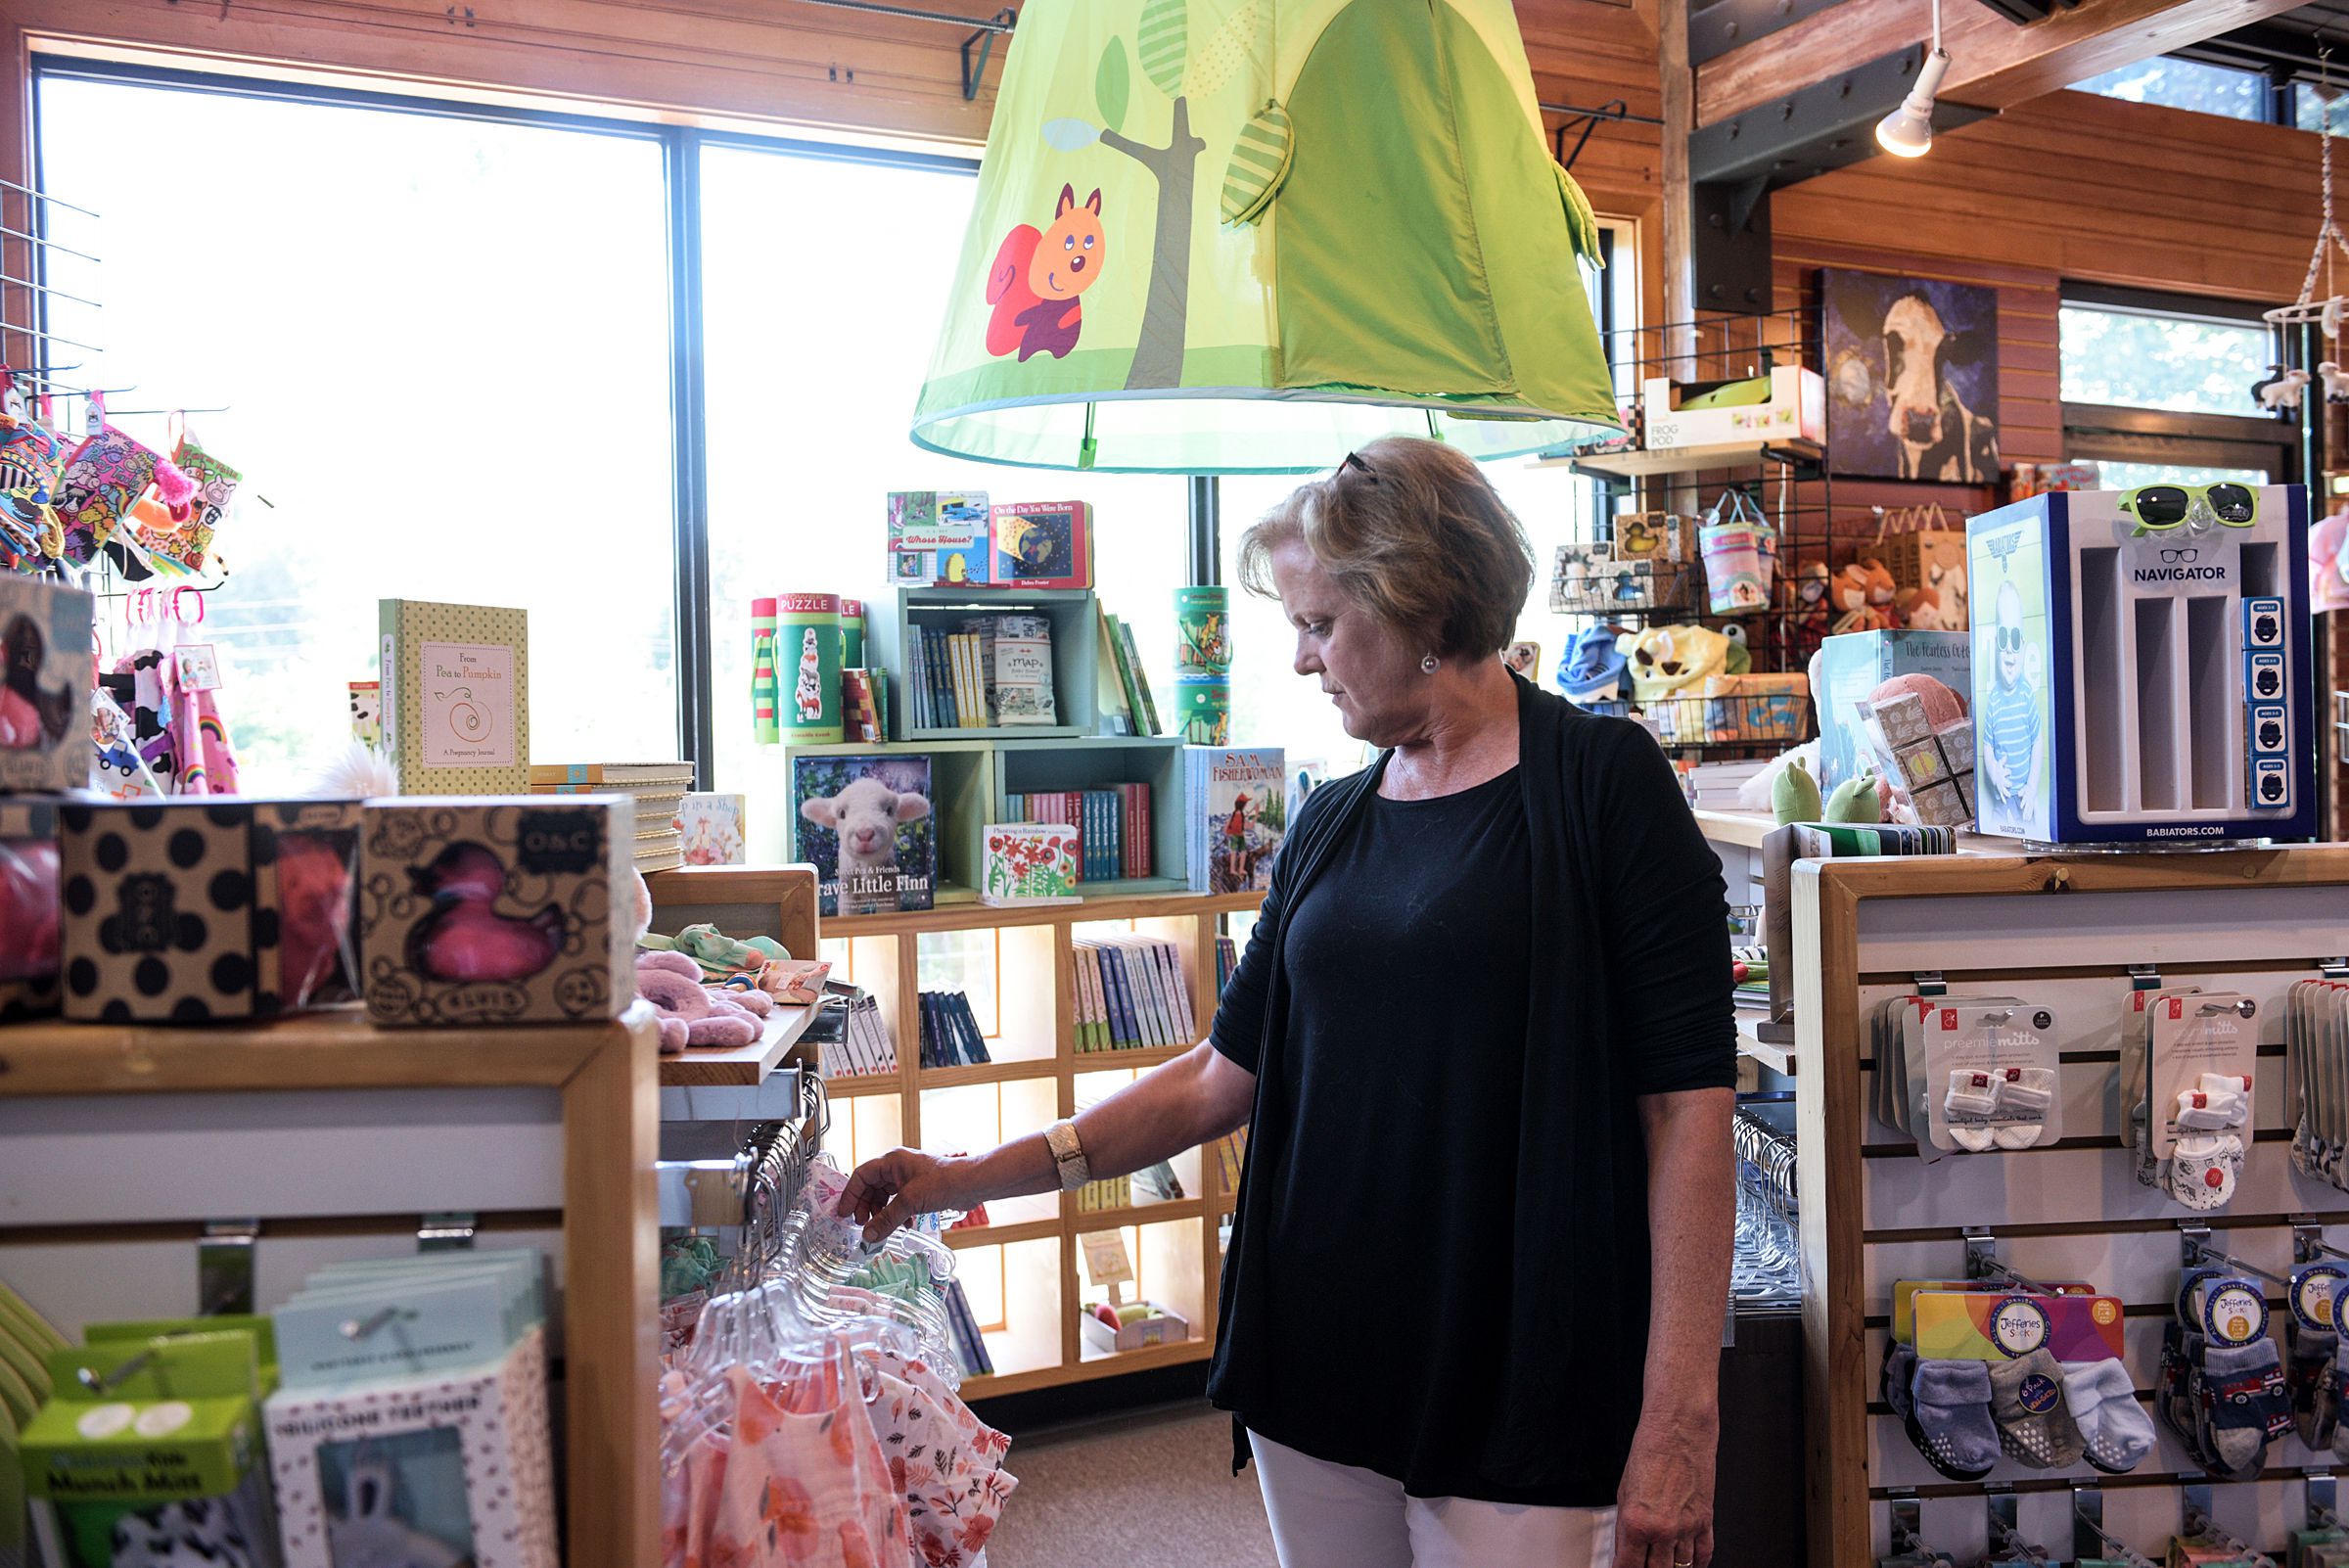 Liz Joyce, of Pomfret, tidies up her merchandise at Country Kids at the Powerhouse Mall in West Lebanon, N.H., after returning to work from a vacation Wednesday, June 26, 2019. Joyce said that she tries to differentiate her store from online retailers by carrying unique products and through a higher level of customer service. (Valley News - James M. Patterson) Copyright Valley News. May not be reprinted or used online without permission. Send requests to permission@vnews.com.